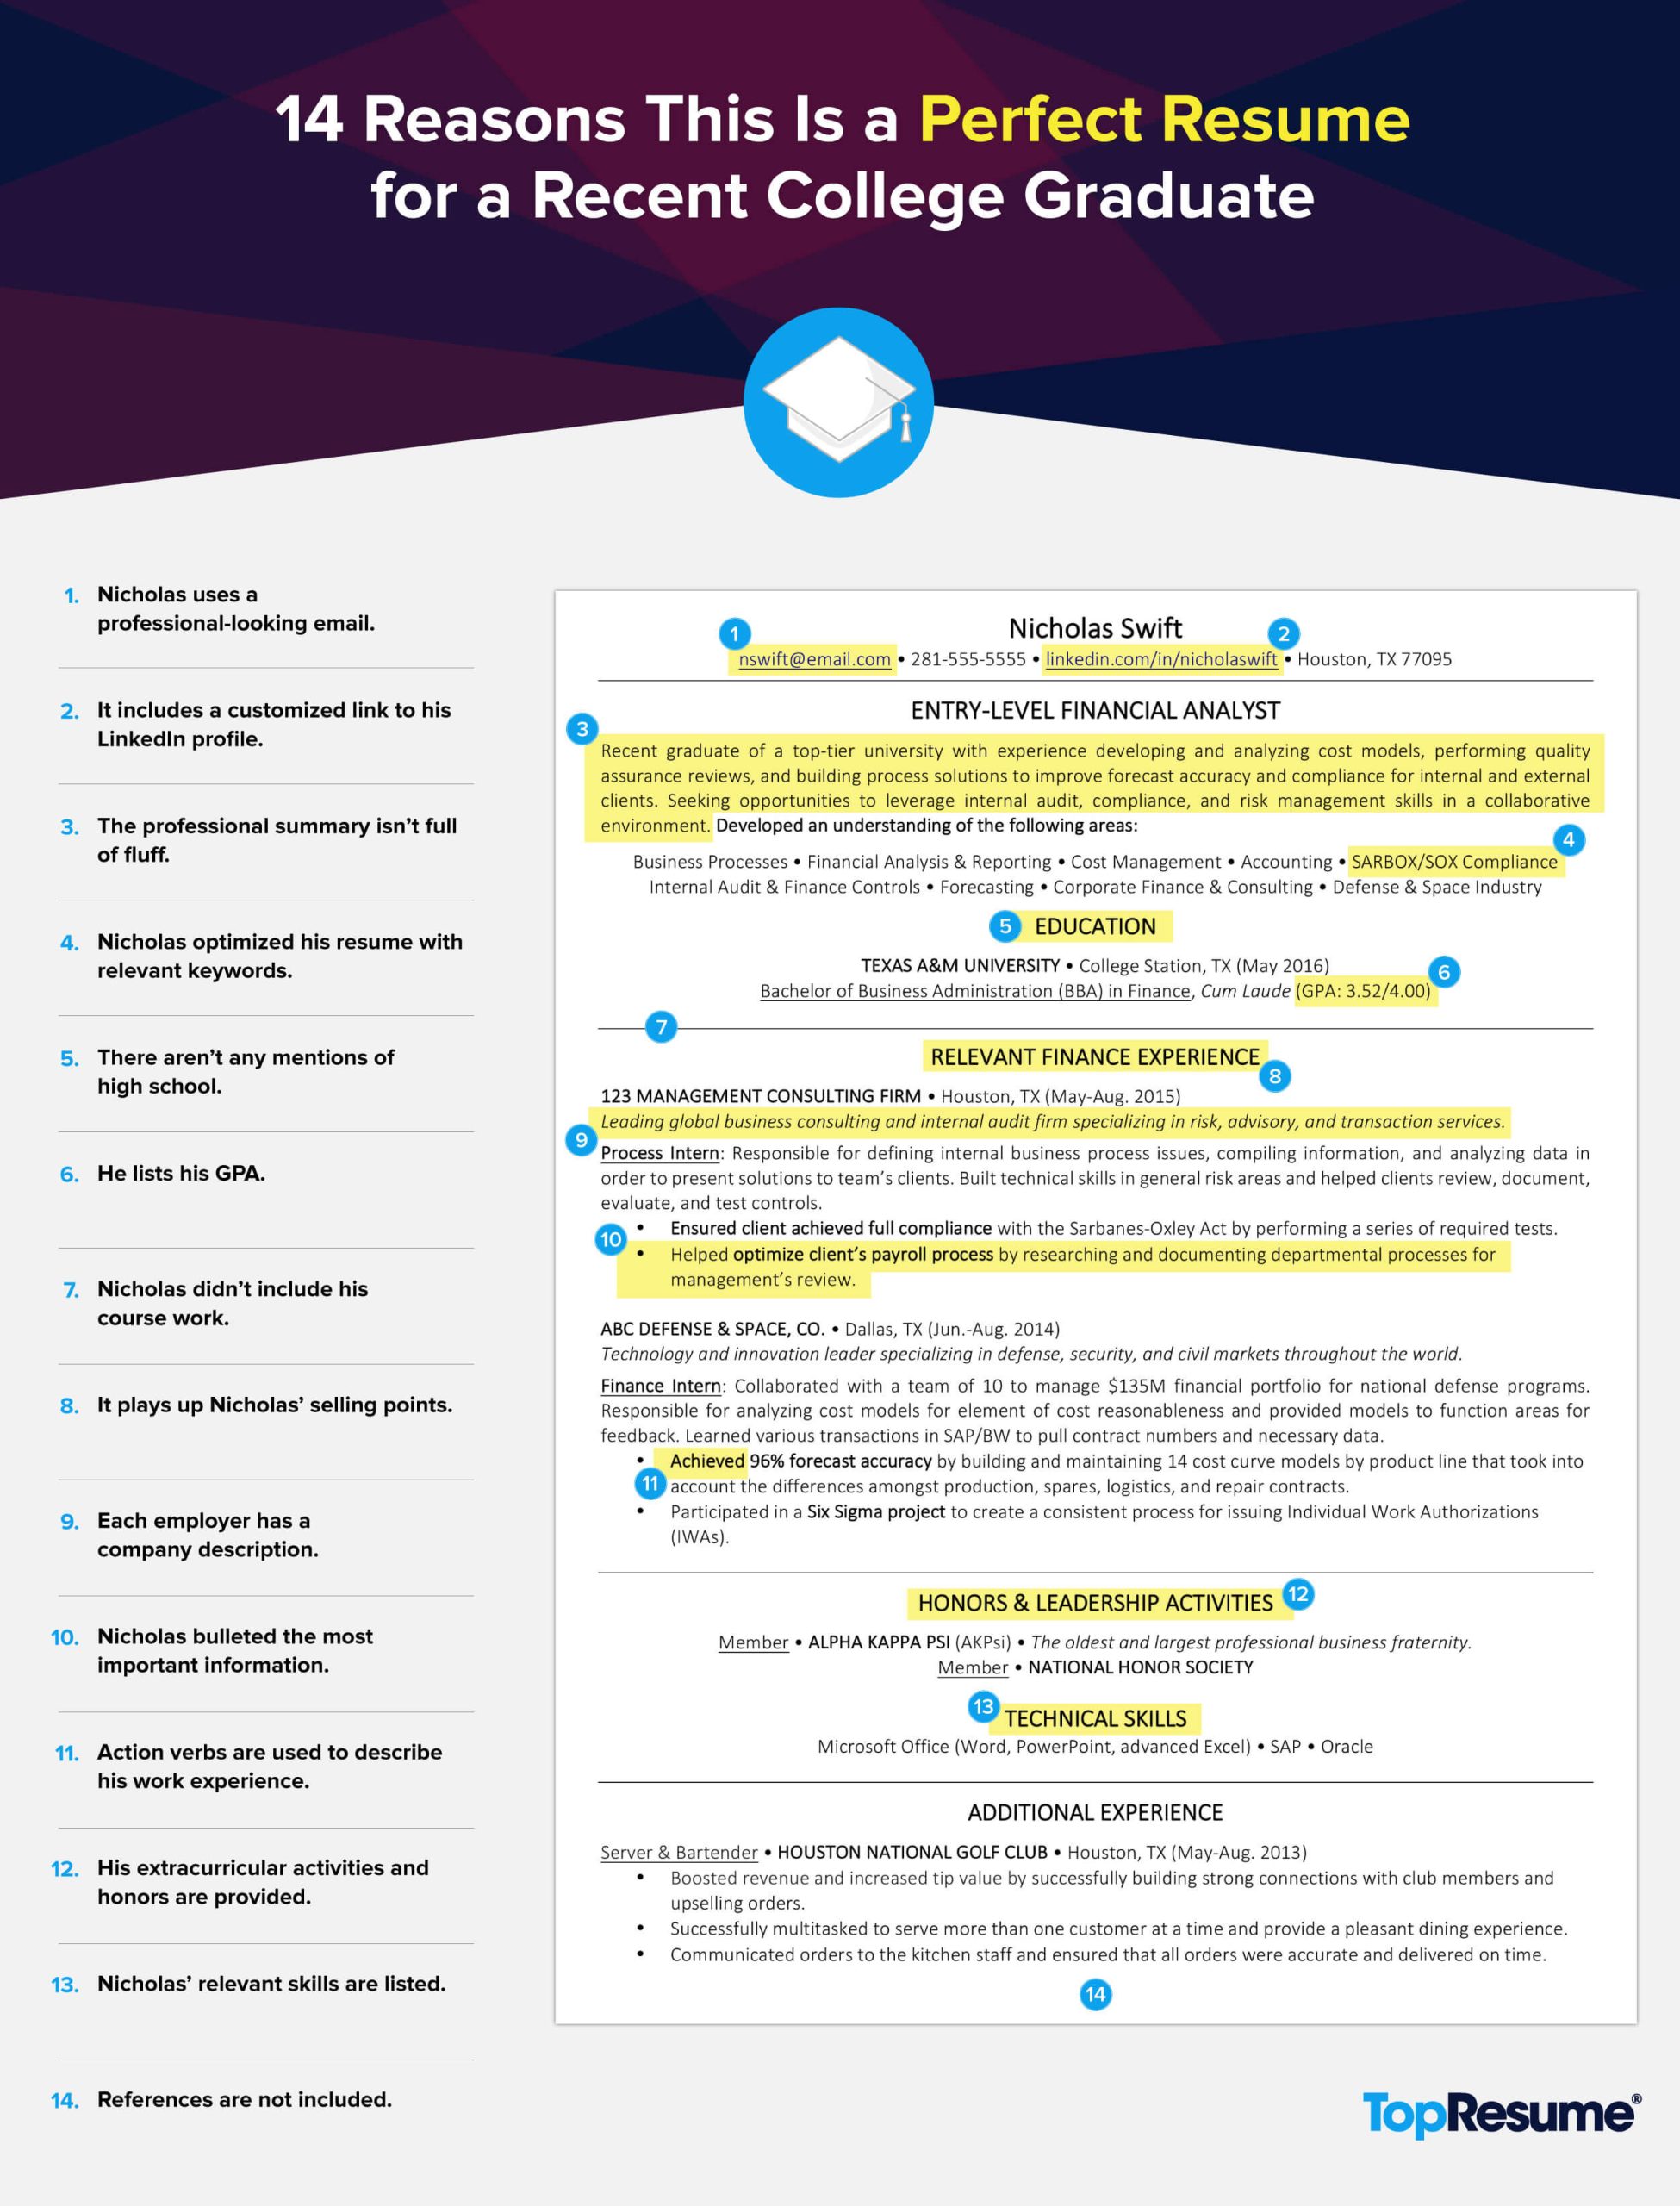 Sample Resume for College Graduate with Little Experience 14 Reasons This is A Perfect Recent College Graduate Resume …